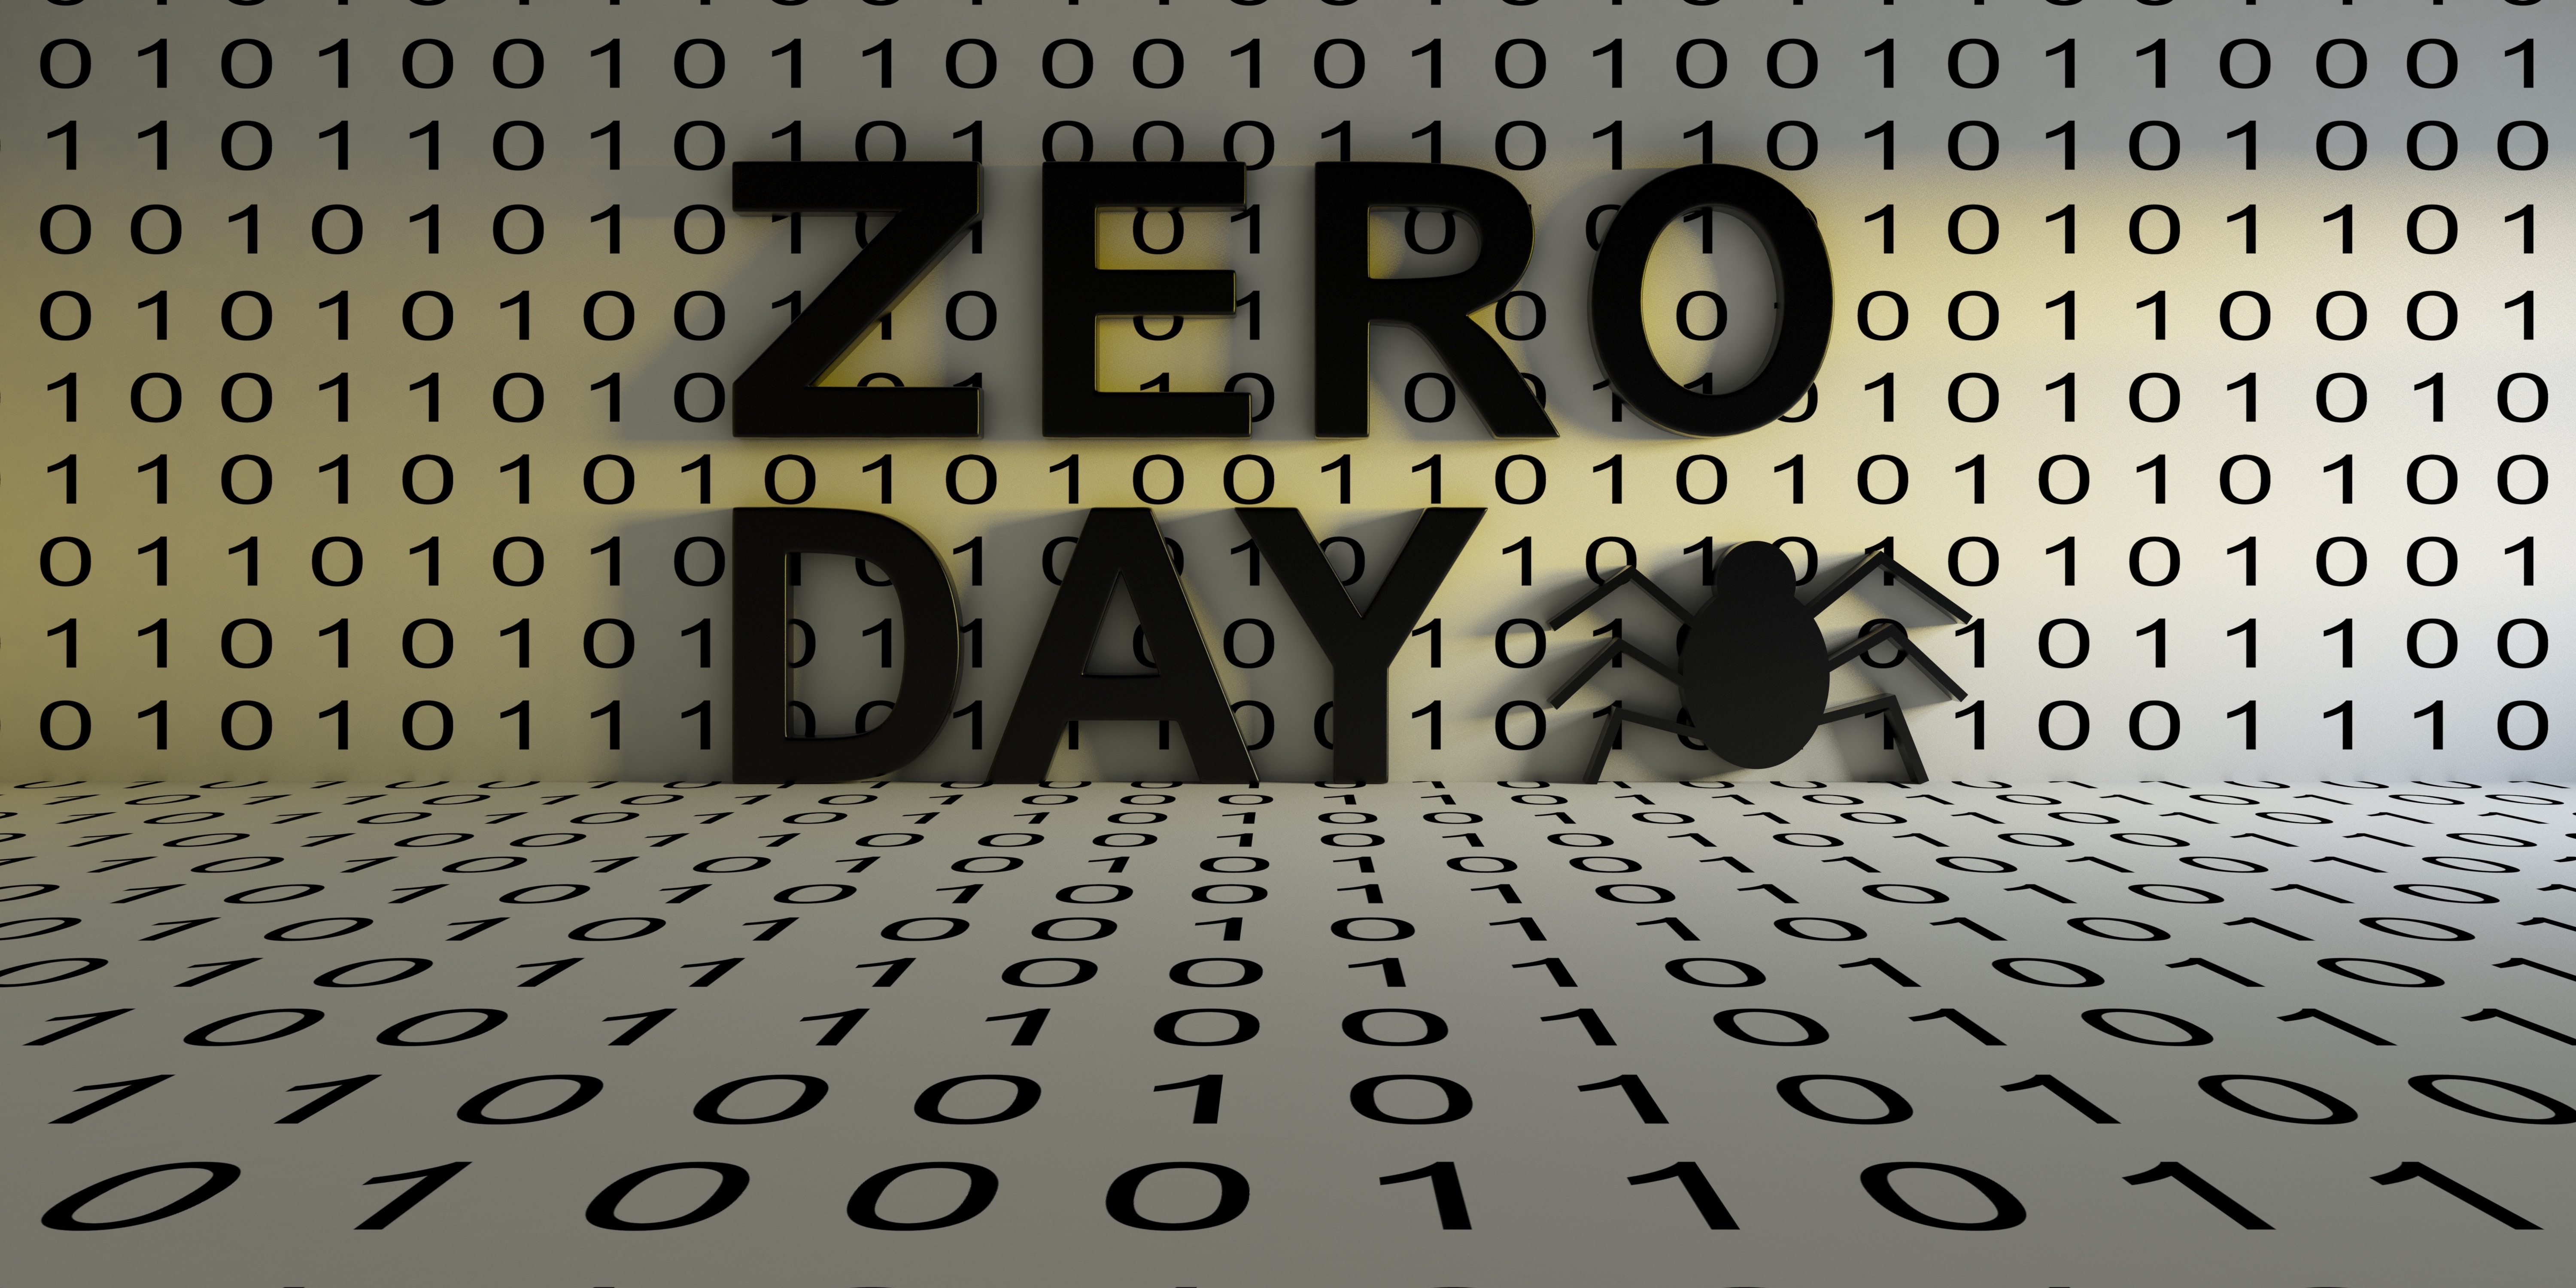 Contrast Assess uncovers Spring-Kafka deserialization zero day